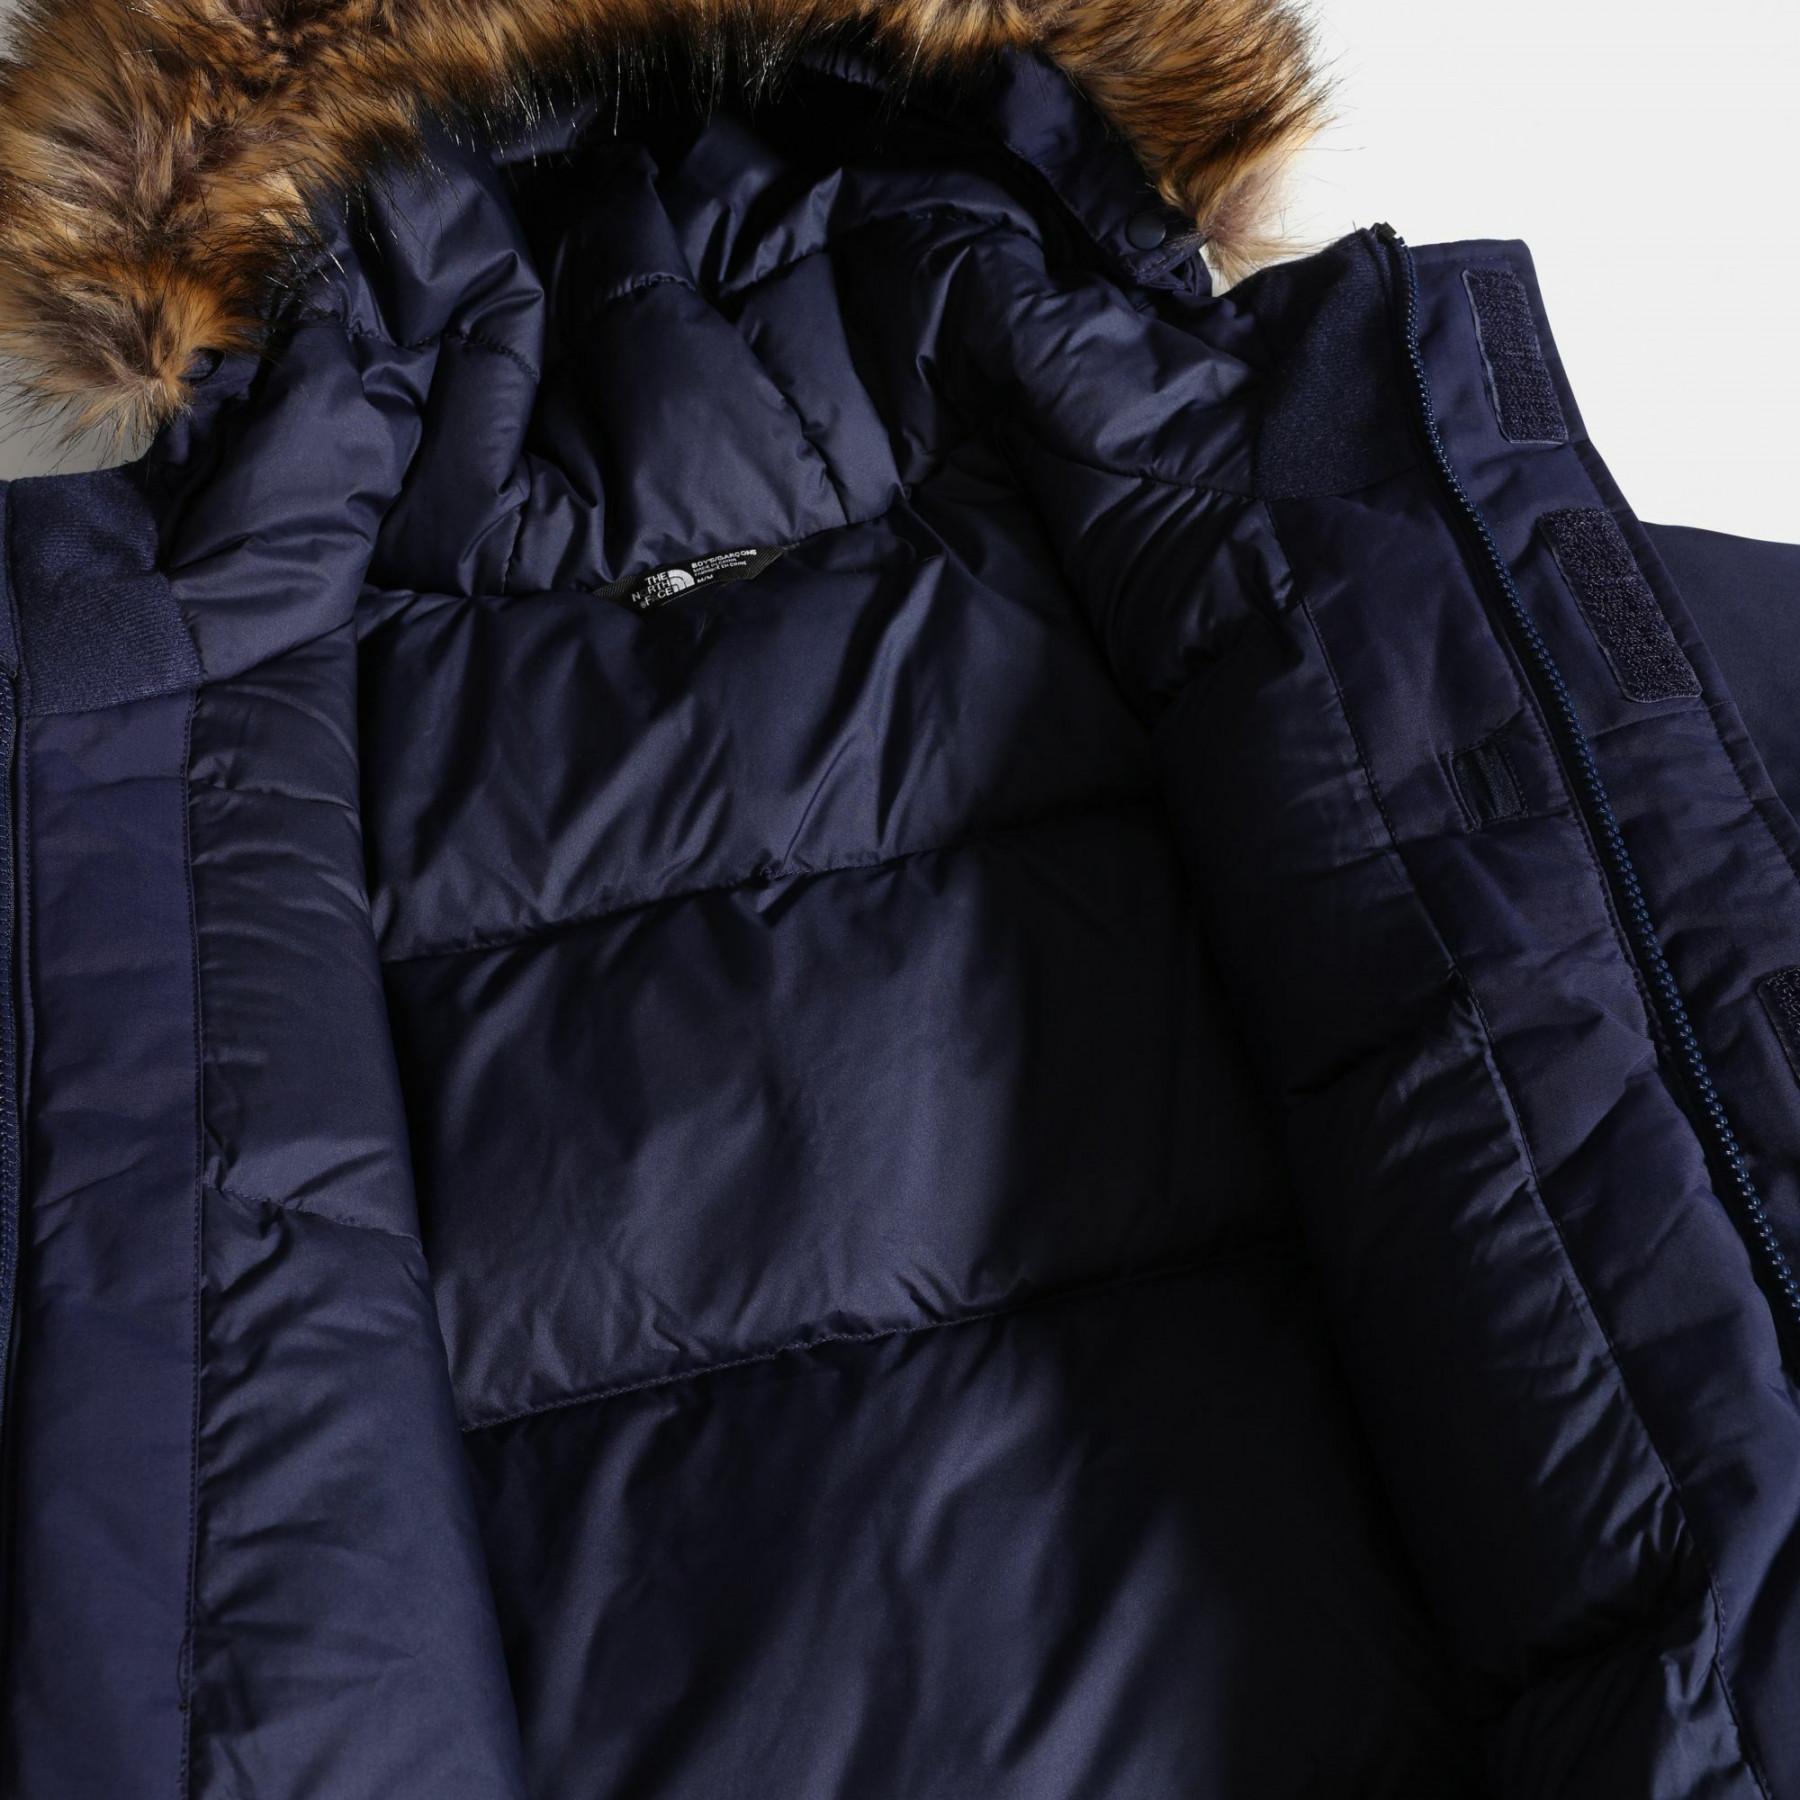 Parka per bambini The North Face DryVent™